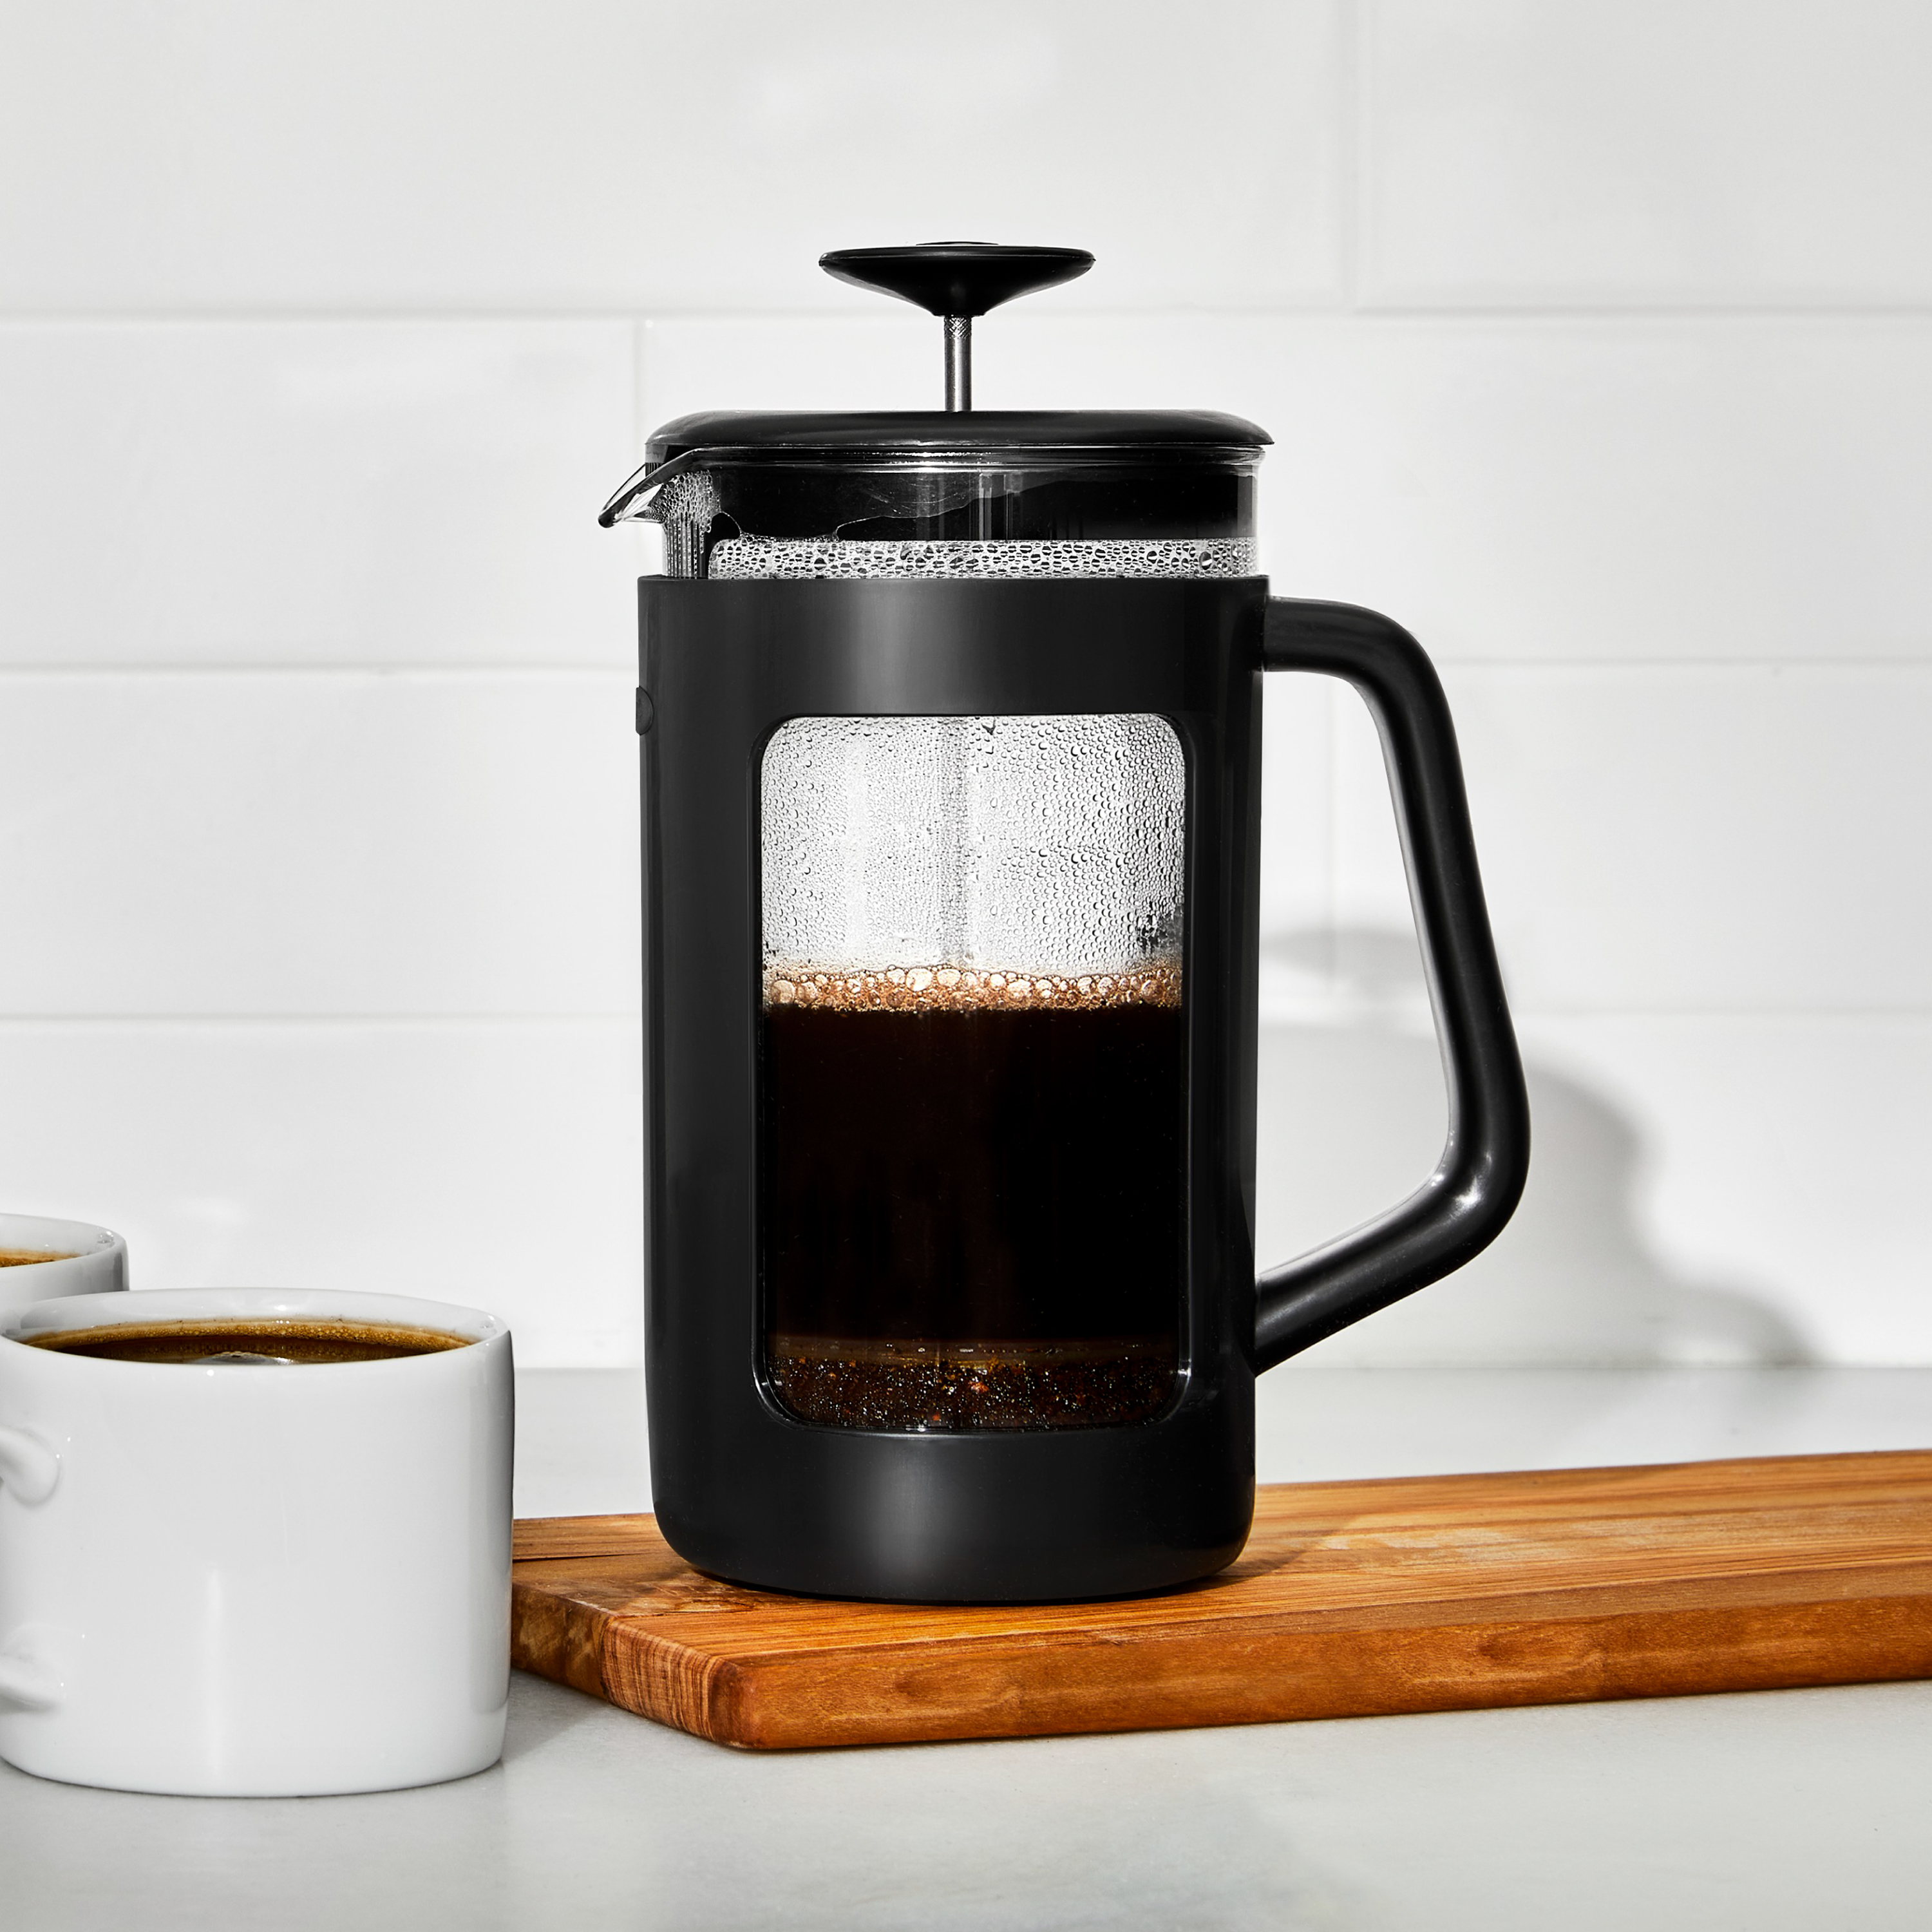 OXO Brew Venture French Press - 8 Cup